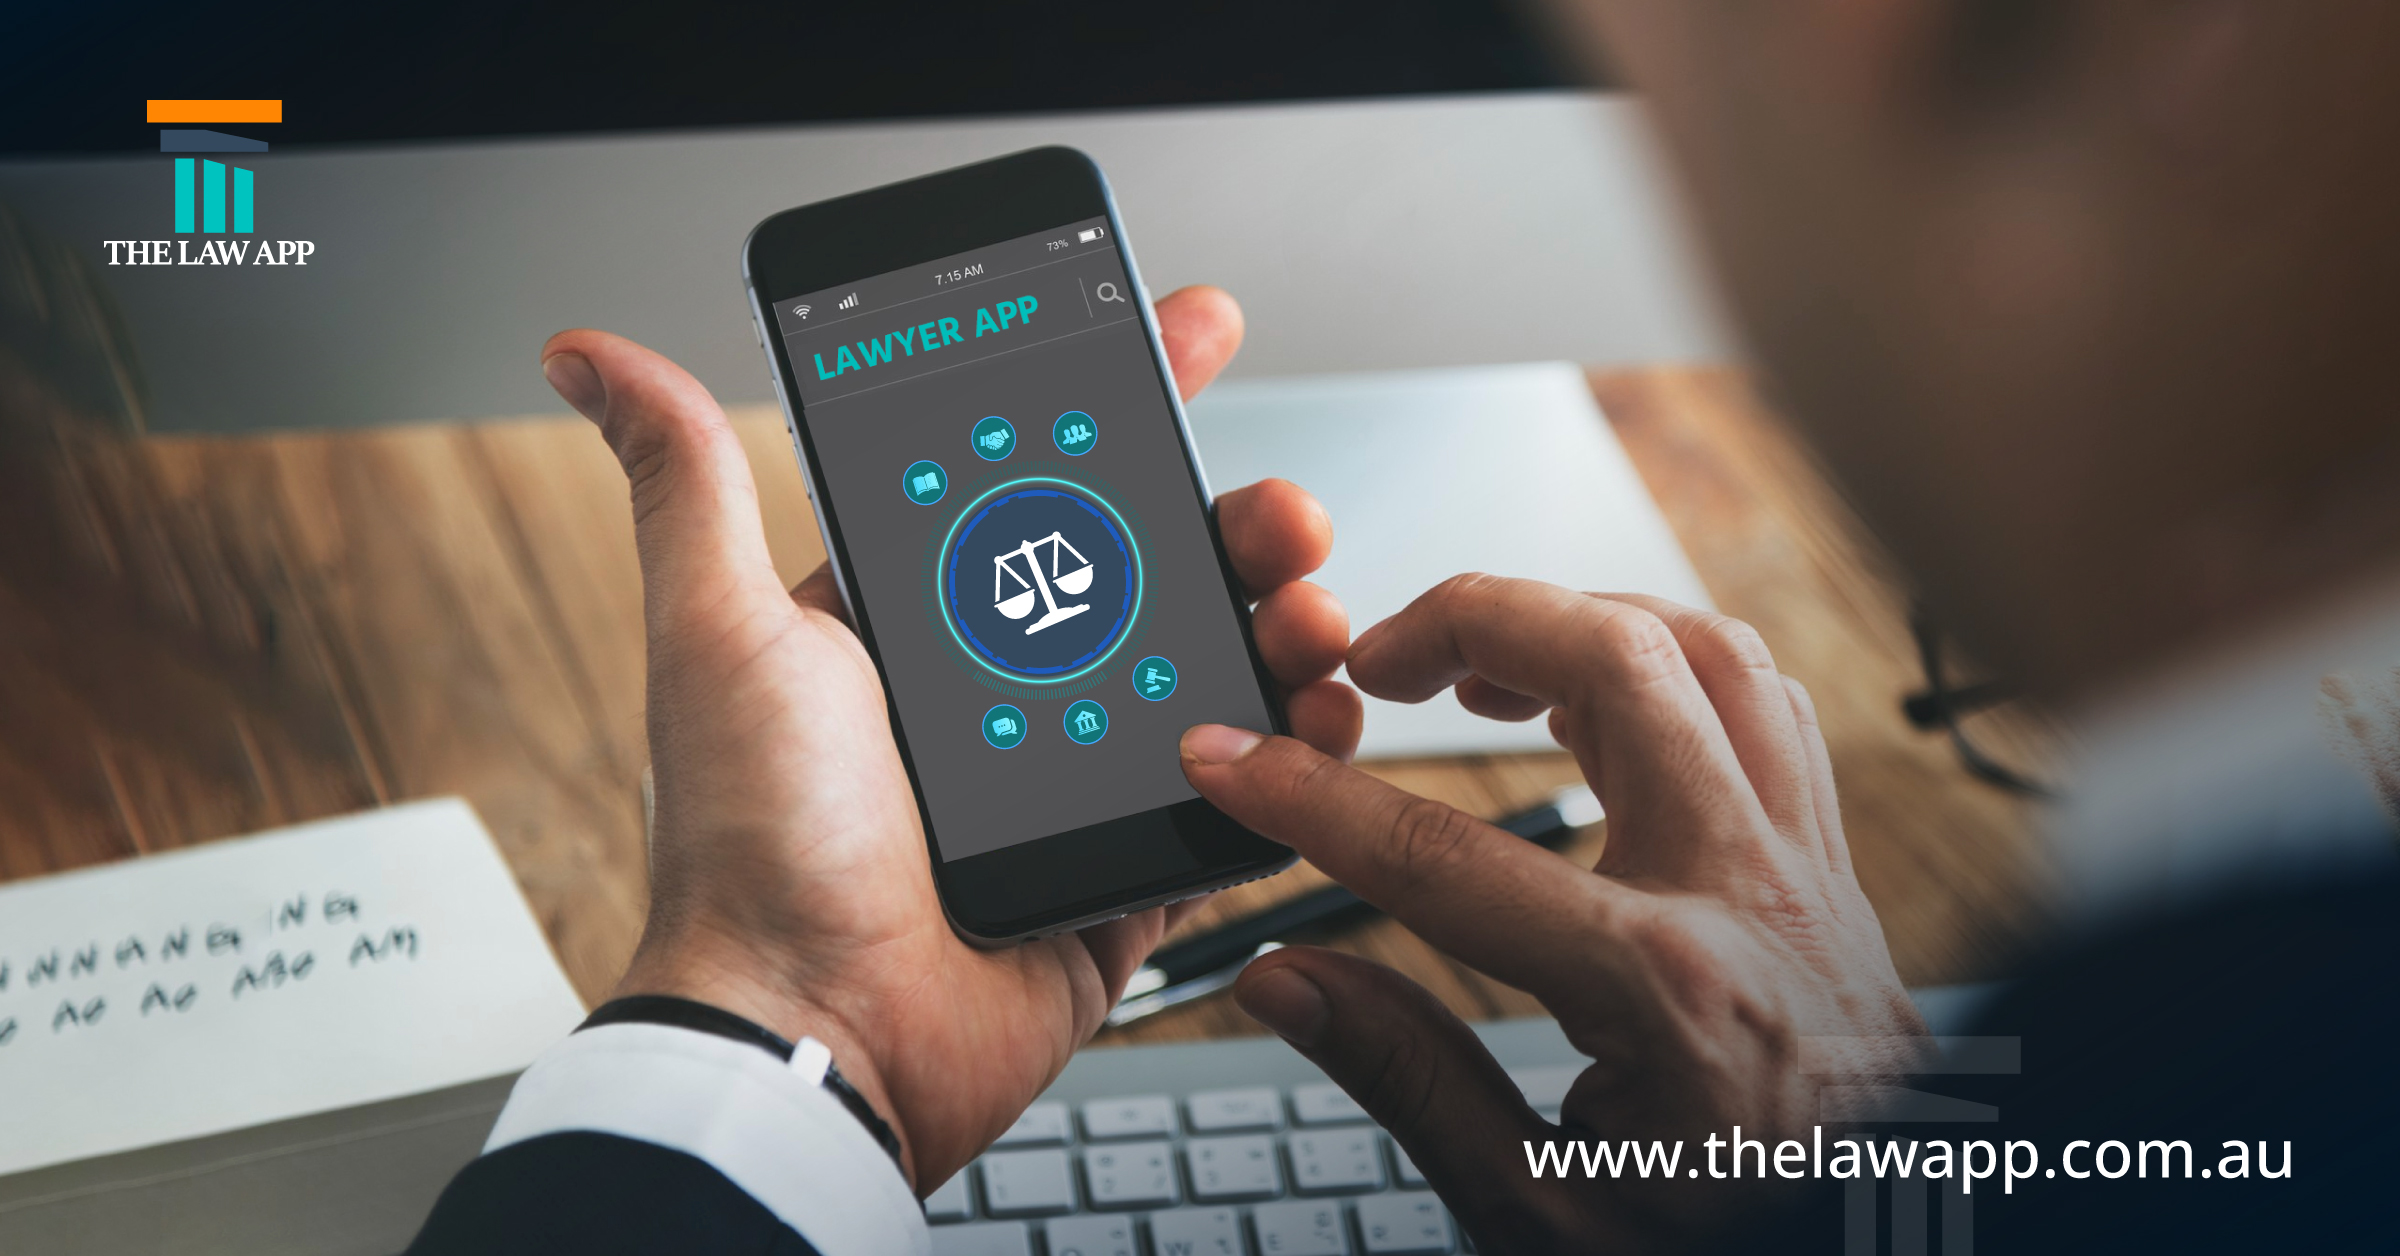 Empower Your Legal Experience with the Top Lawyer App